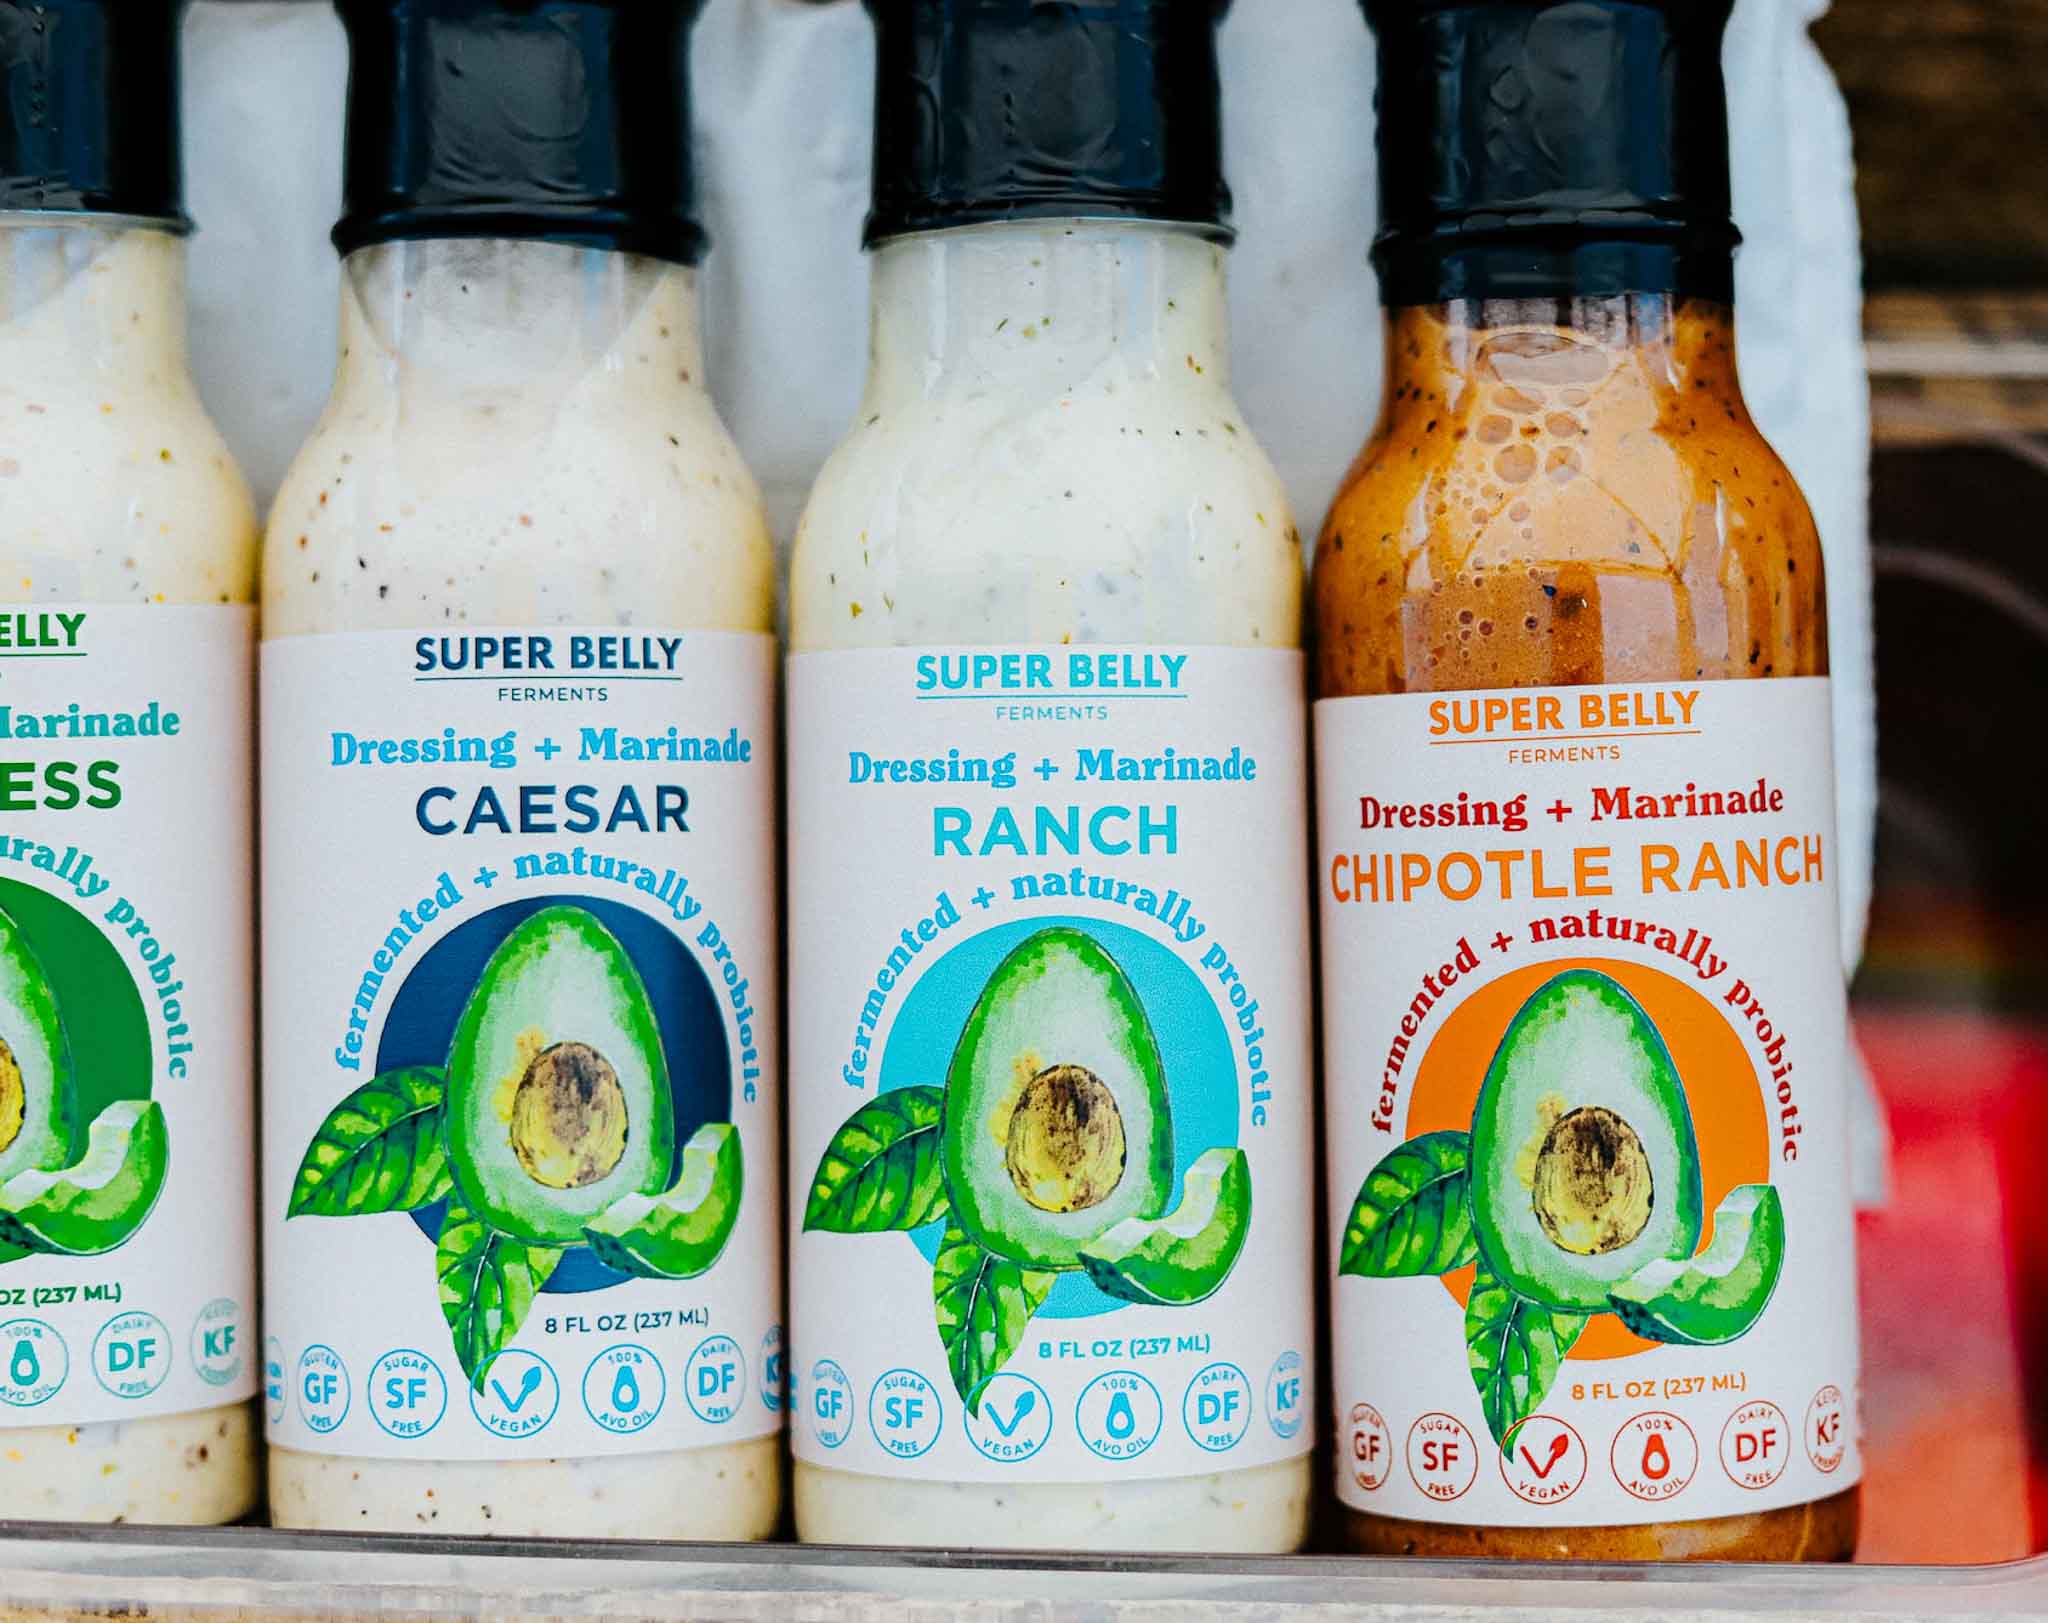 row of salad dressing bottles labled "super belly ferments" with an avocado logo on the front